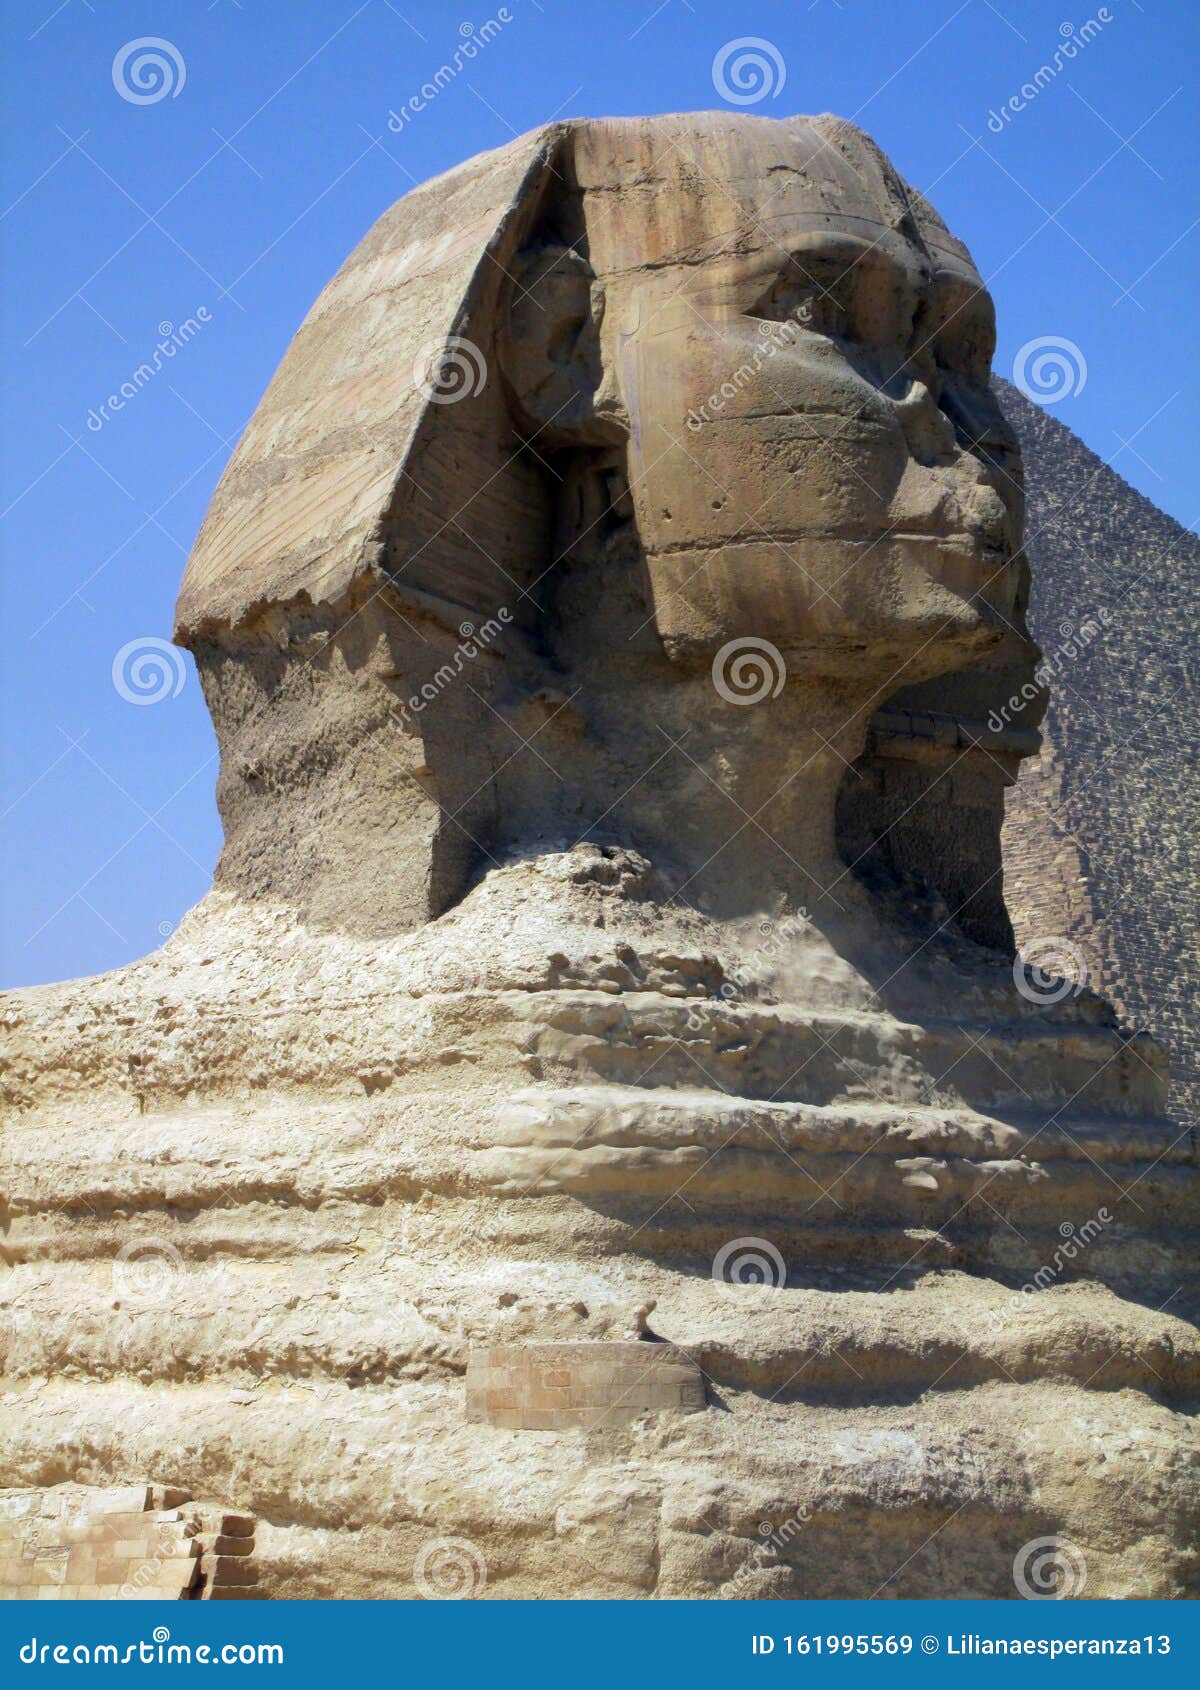 sphinxes of giza egypt